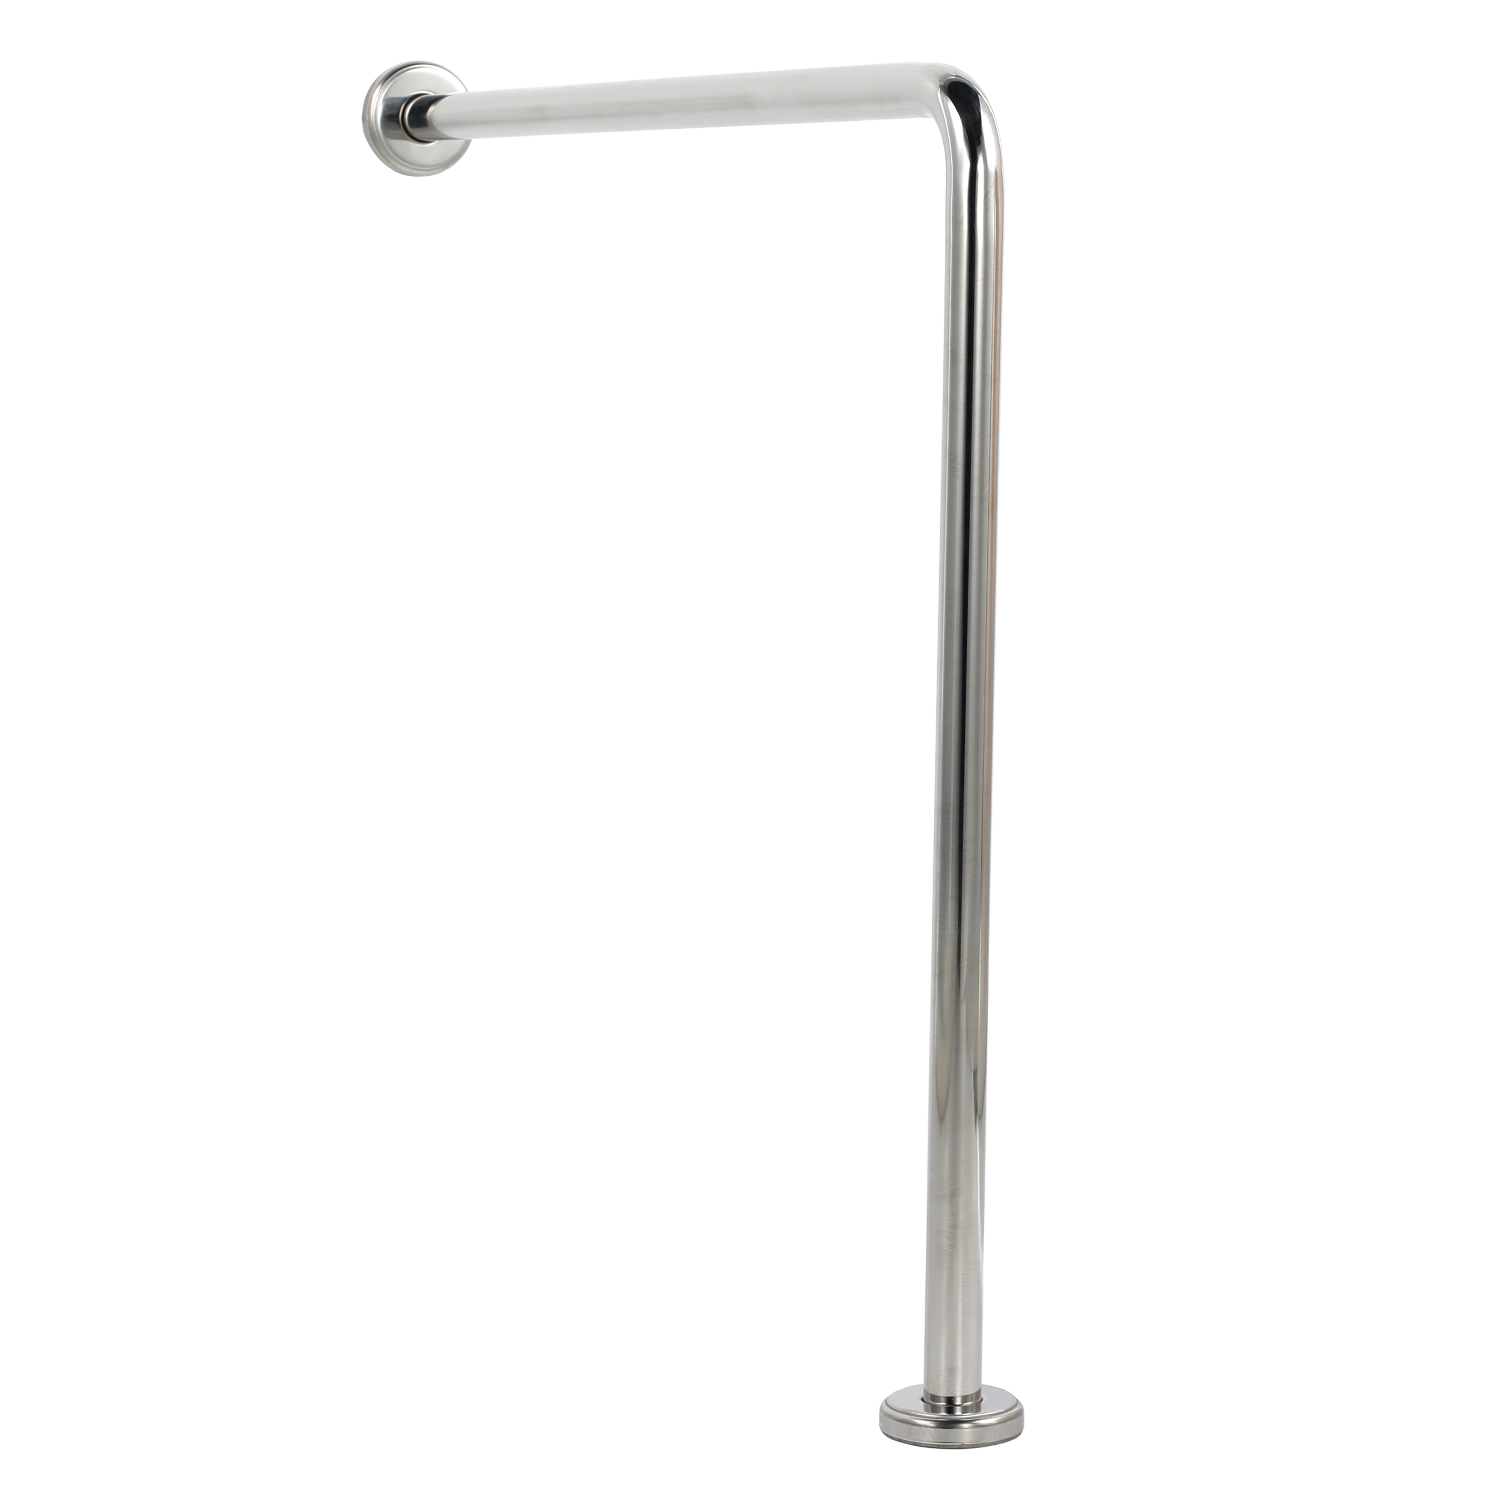 Stainless Steel Grab Bar For Disabled